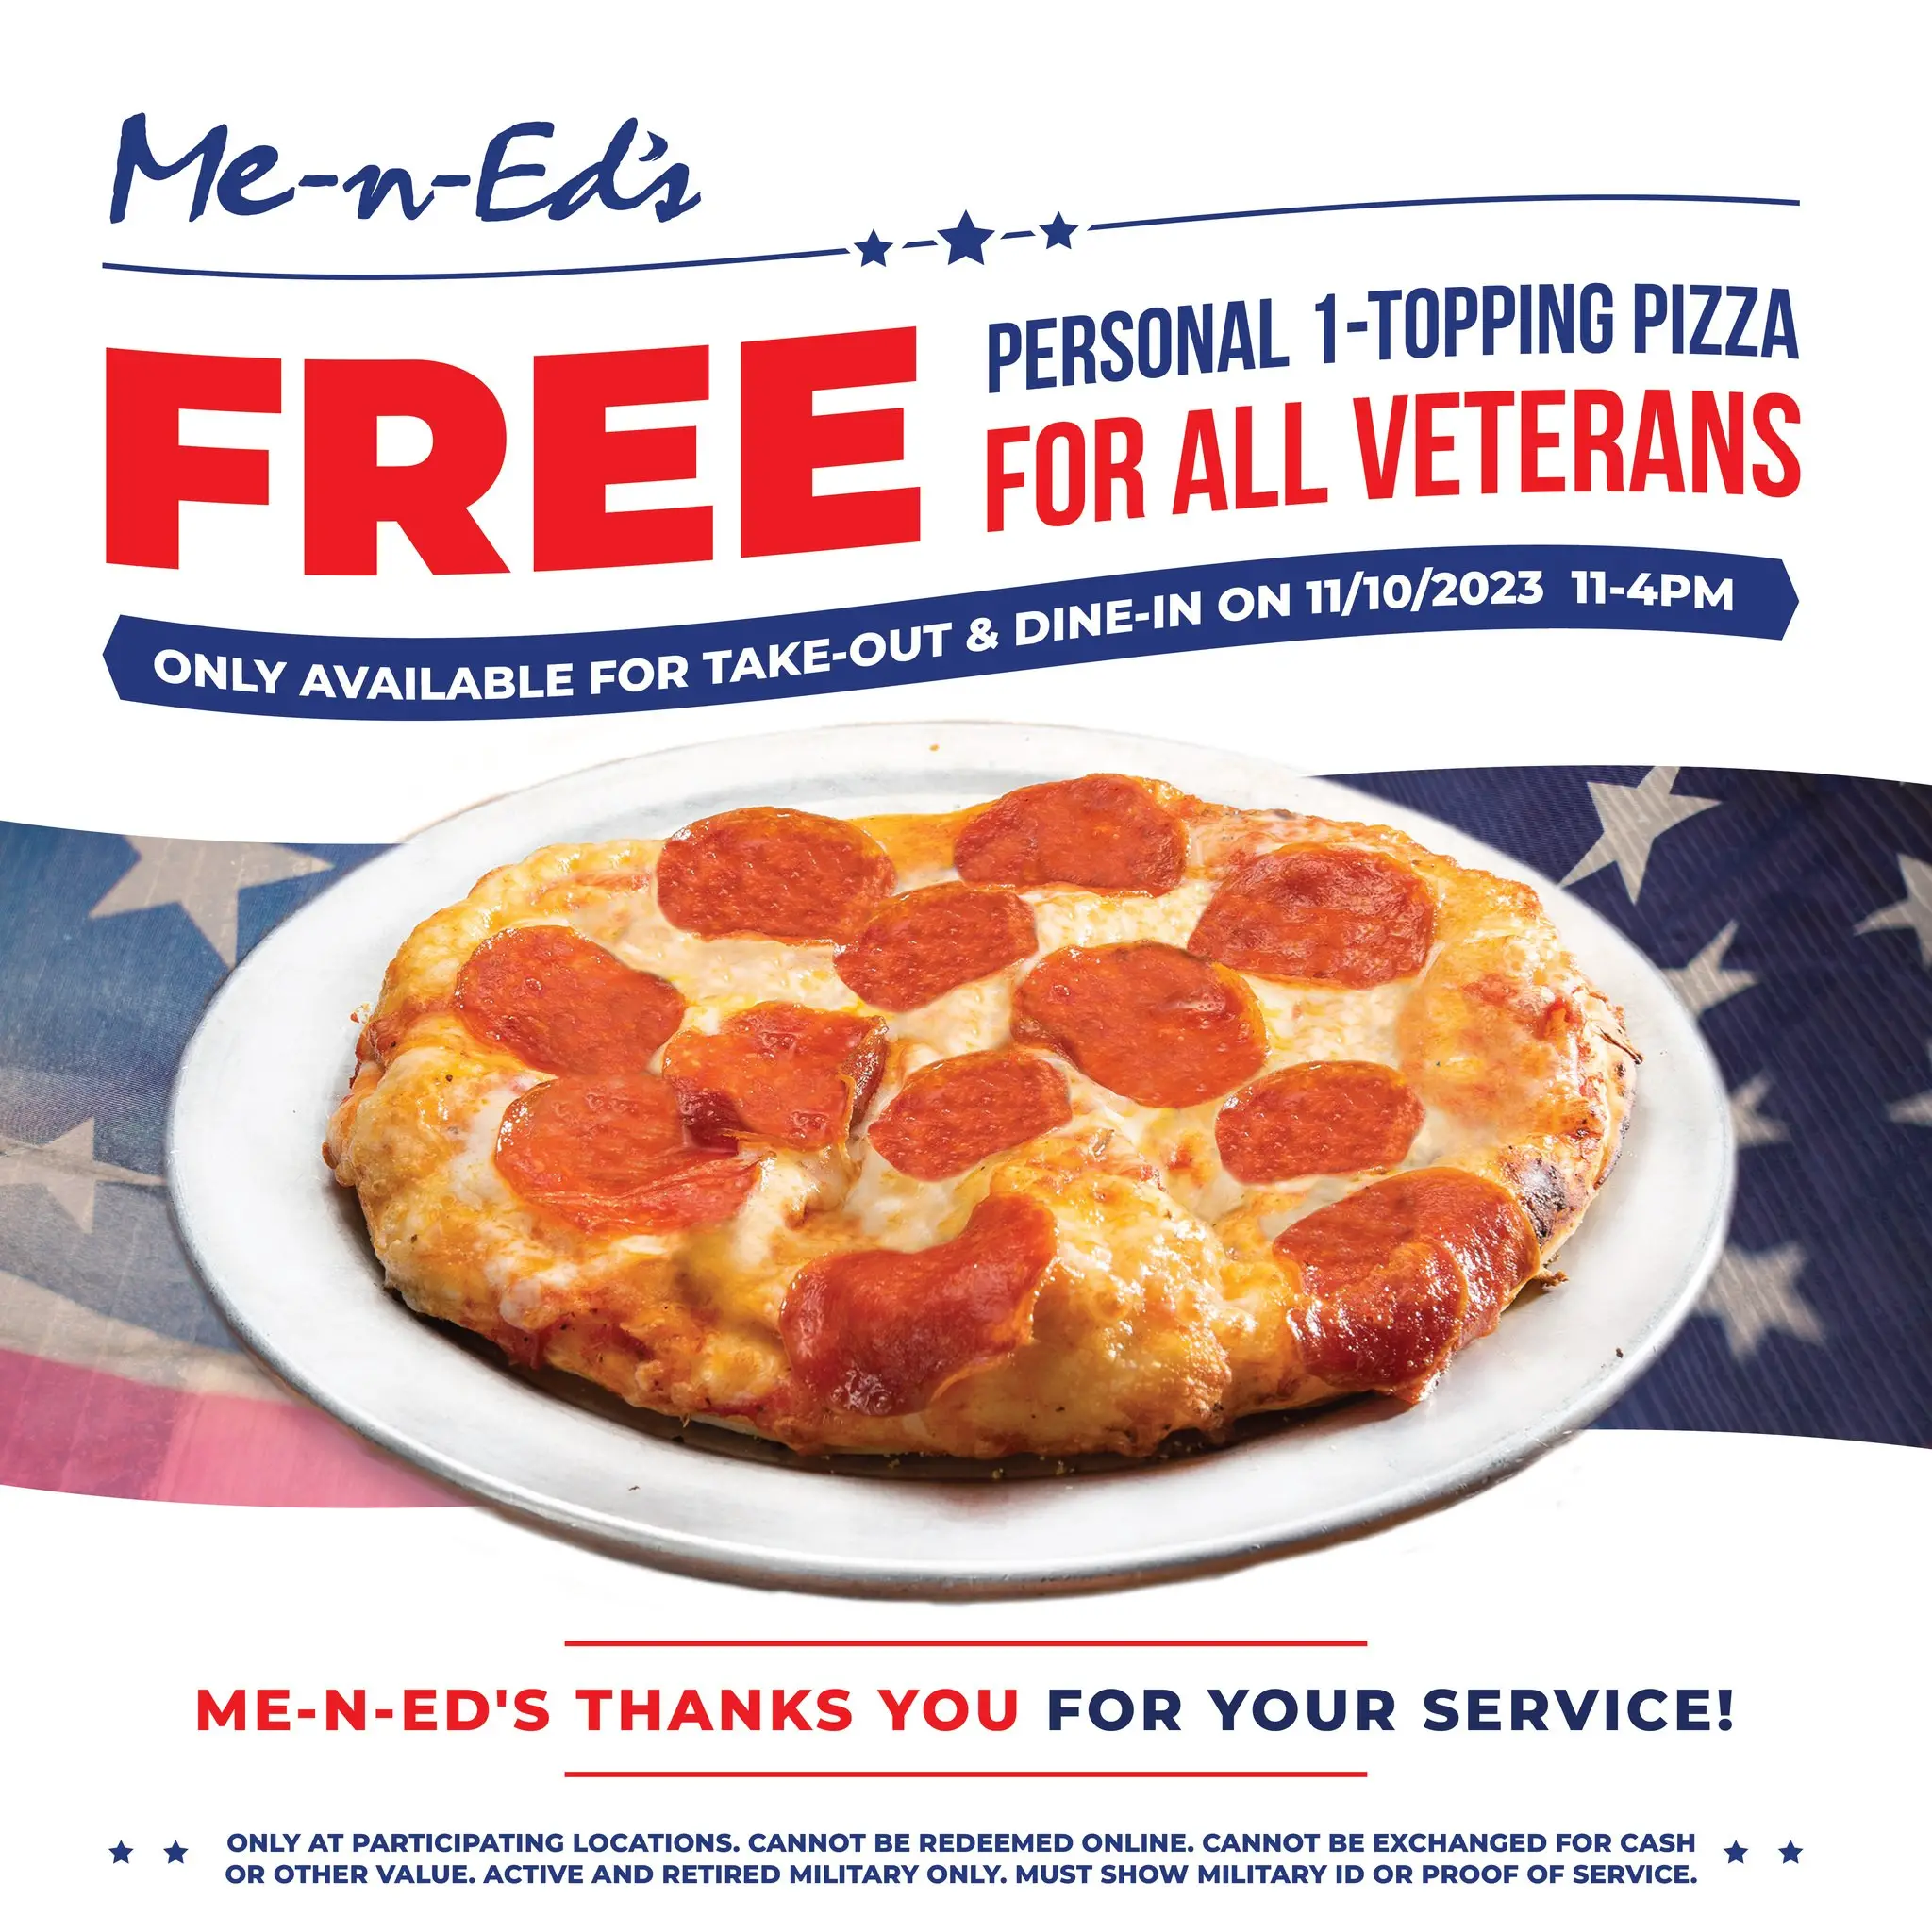 Me-N-Ed's Pizza Veterans Day Free Personal 1-Topping Pizza for All Veterans and Military